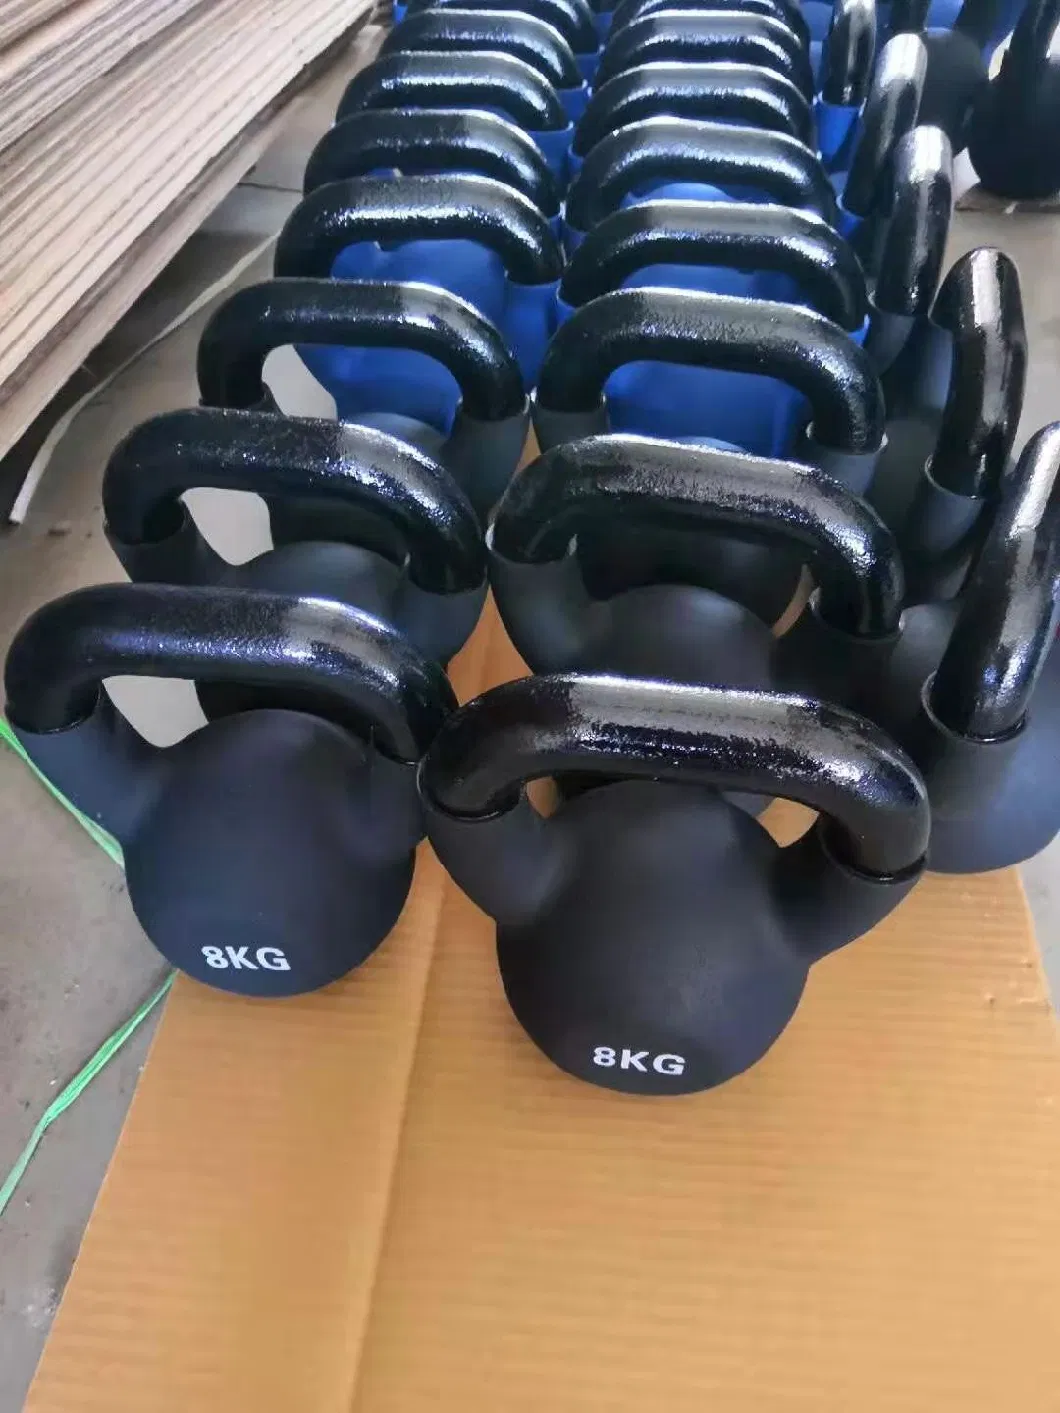 Gym Fitness Equipment Kettlebell for Workout